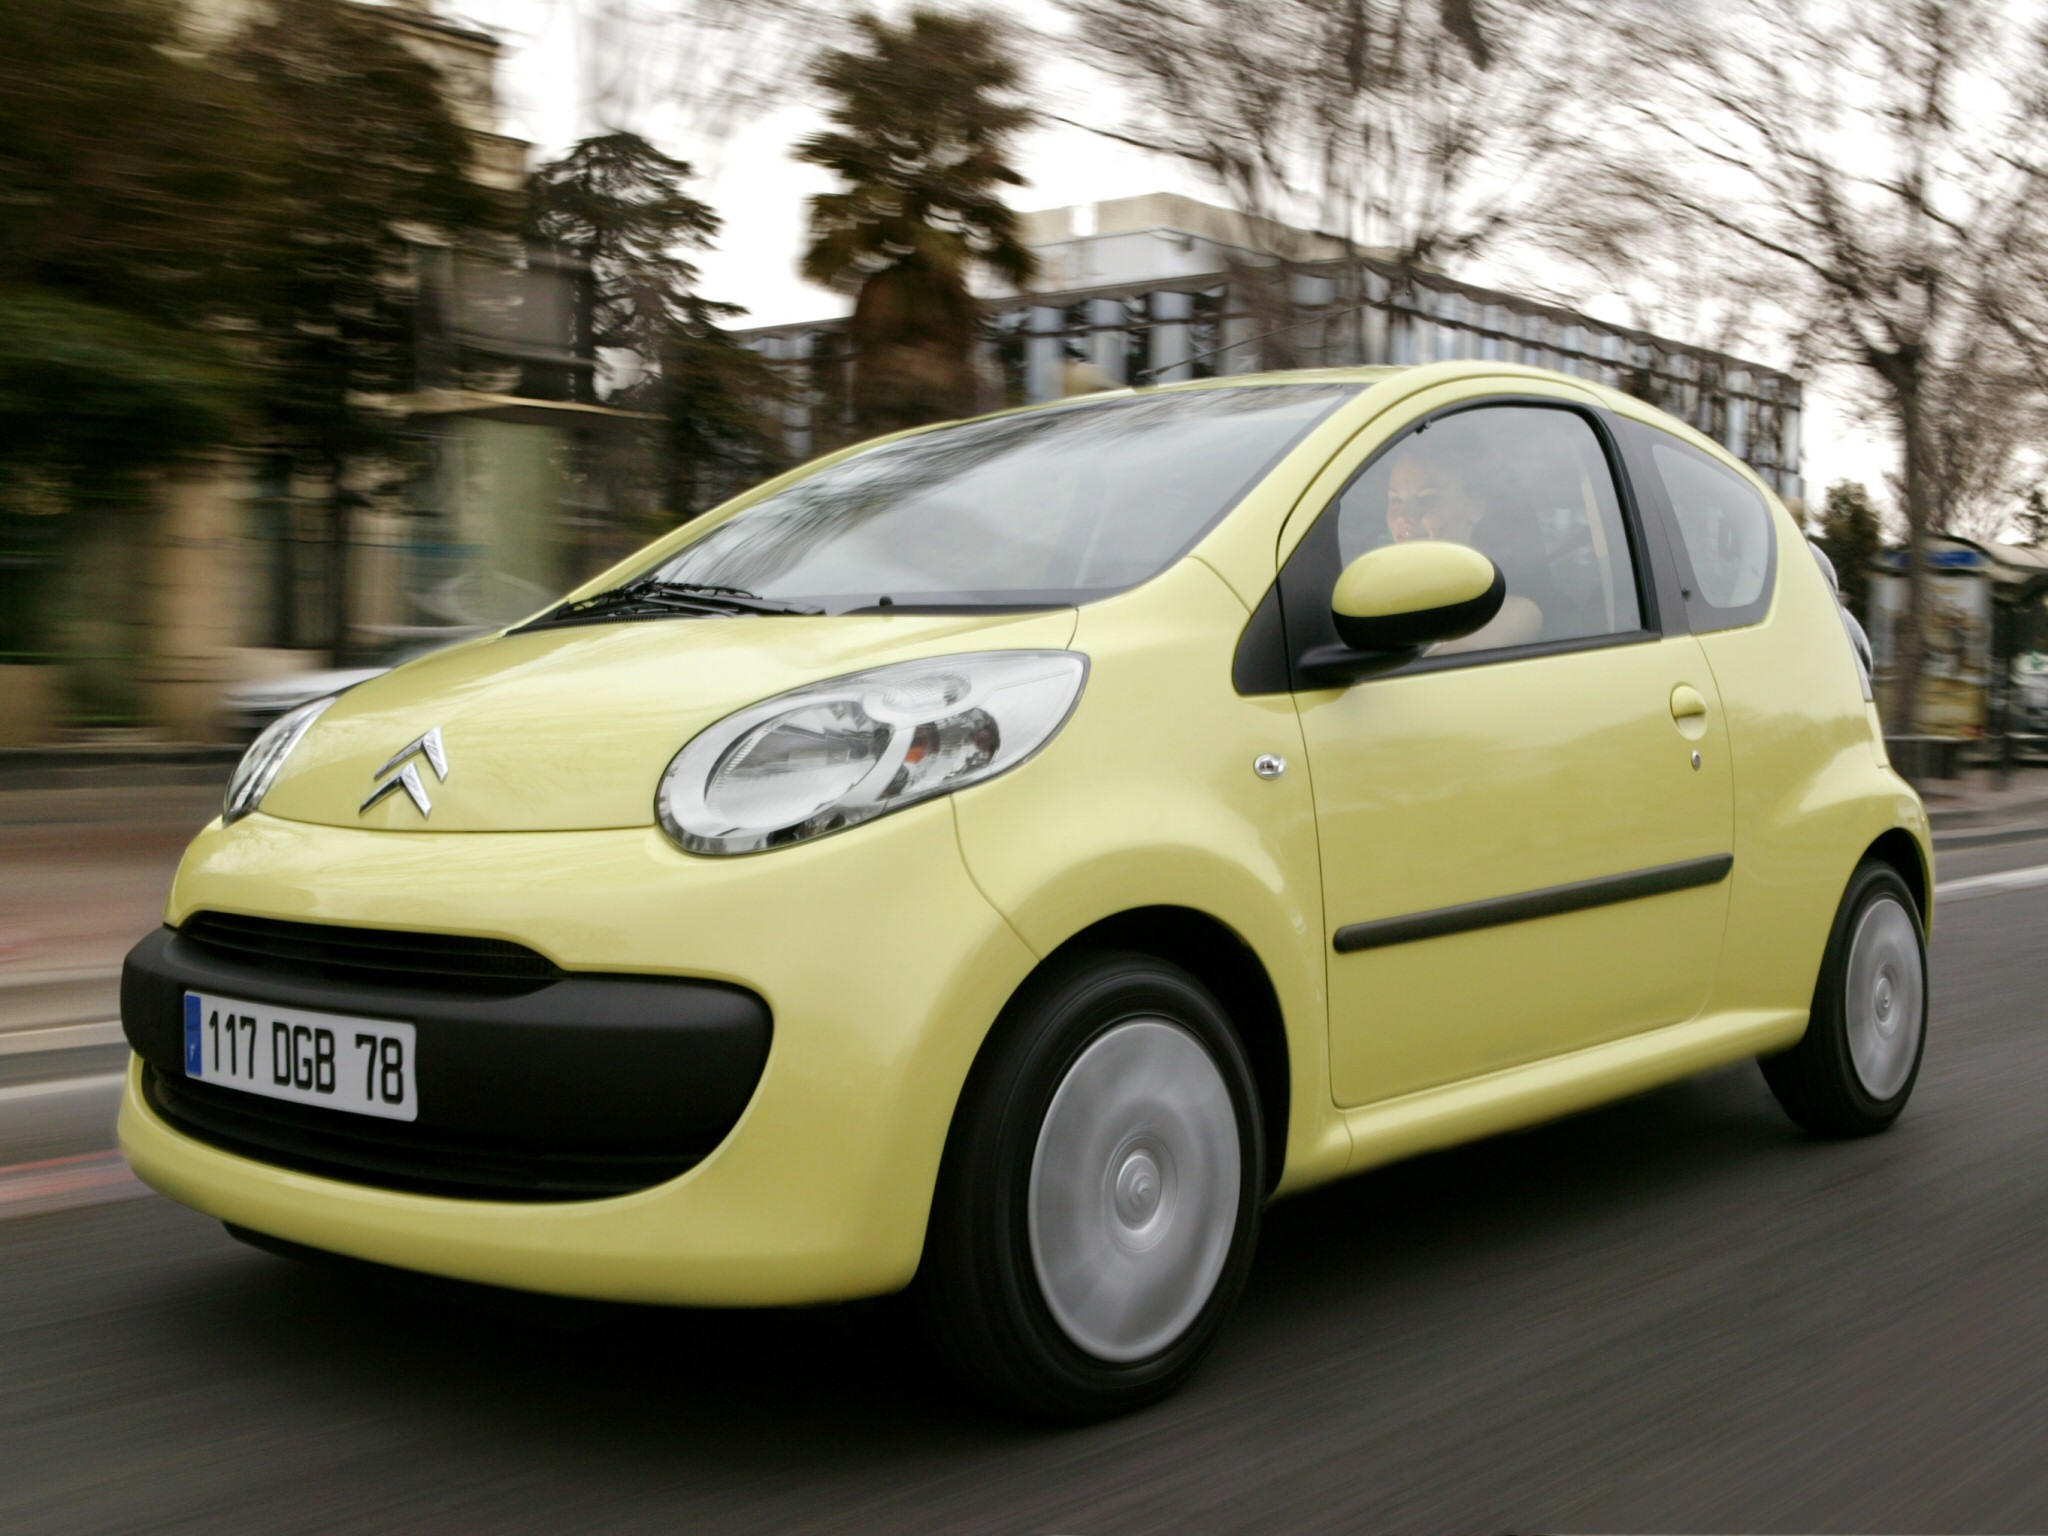 Car in pictures car photo gallery » Citroen C1 2006 Photo 08